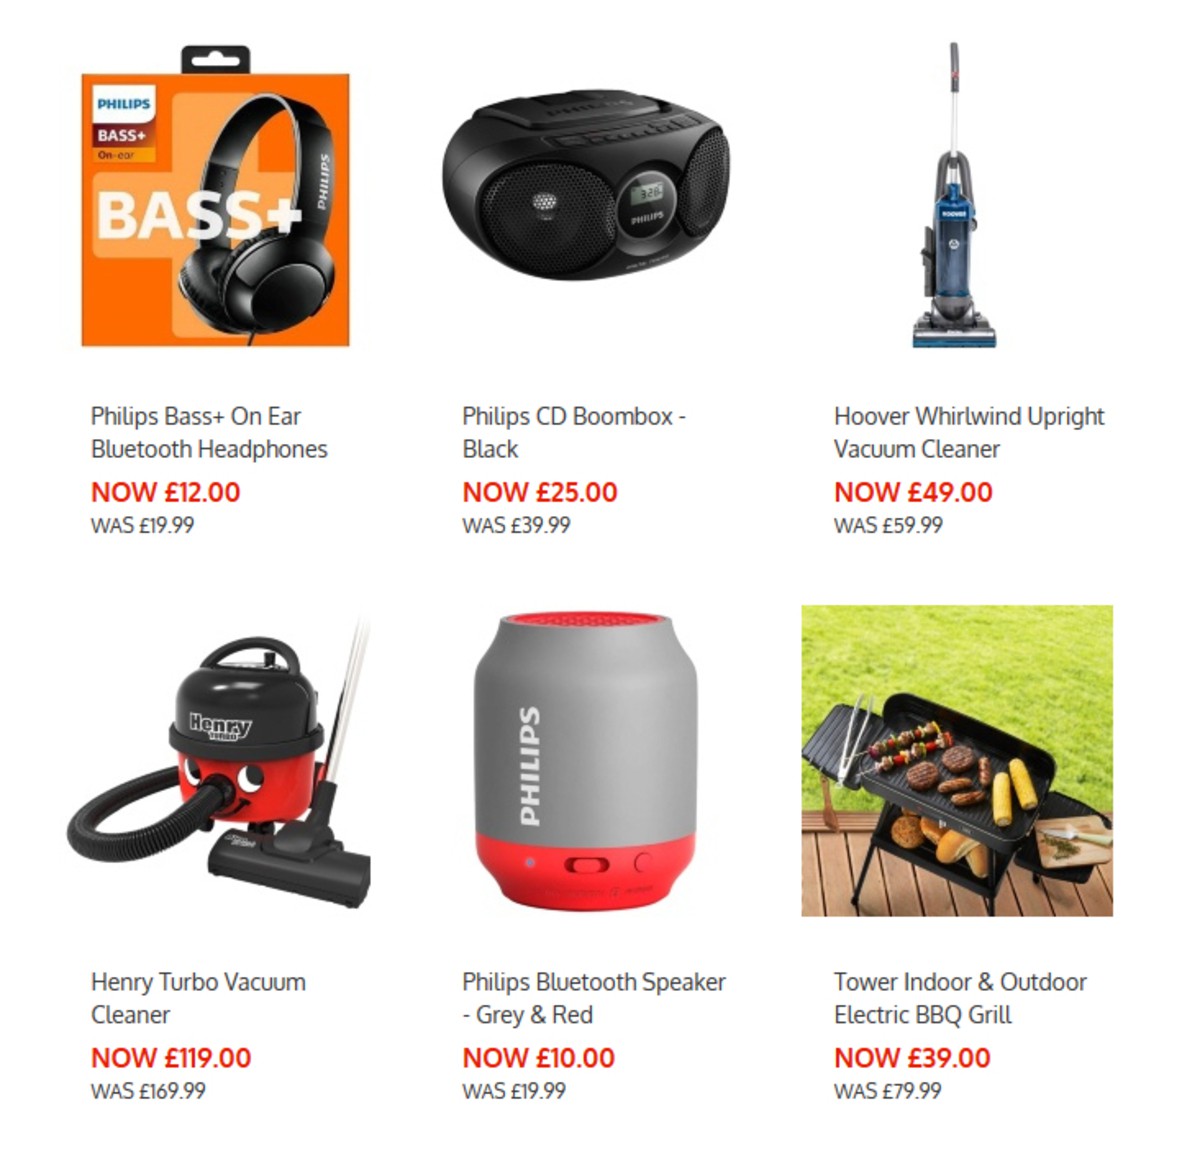 B&M Offers from 10 April